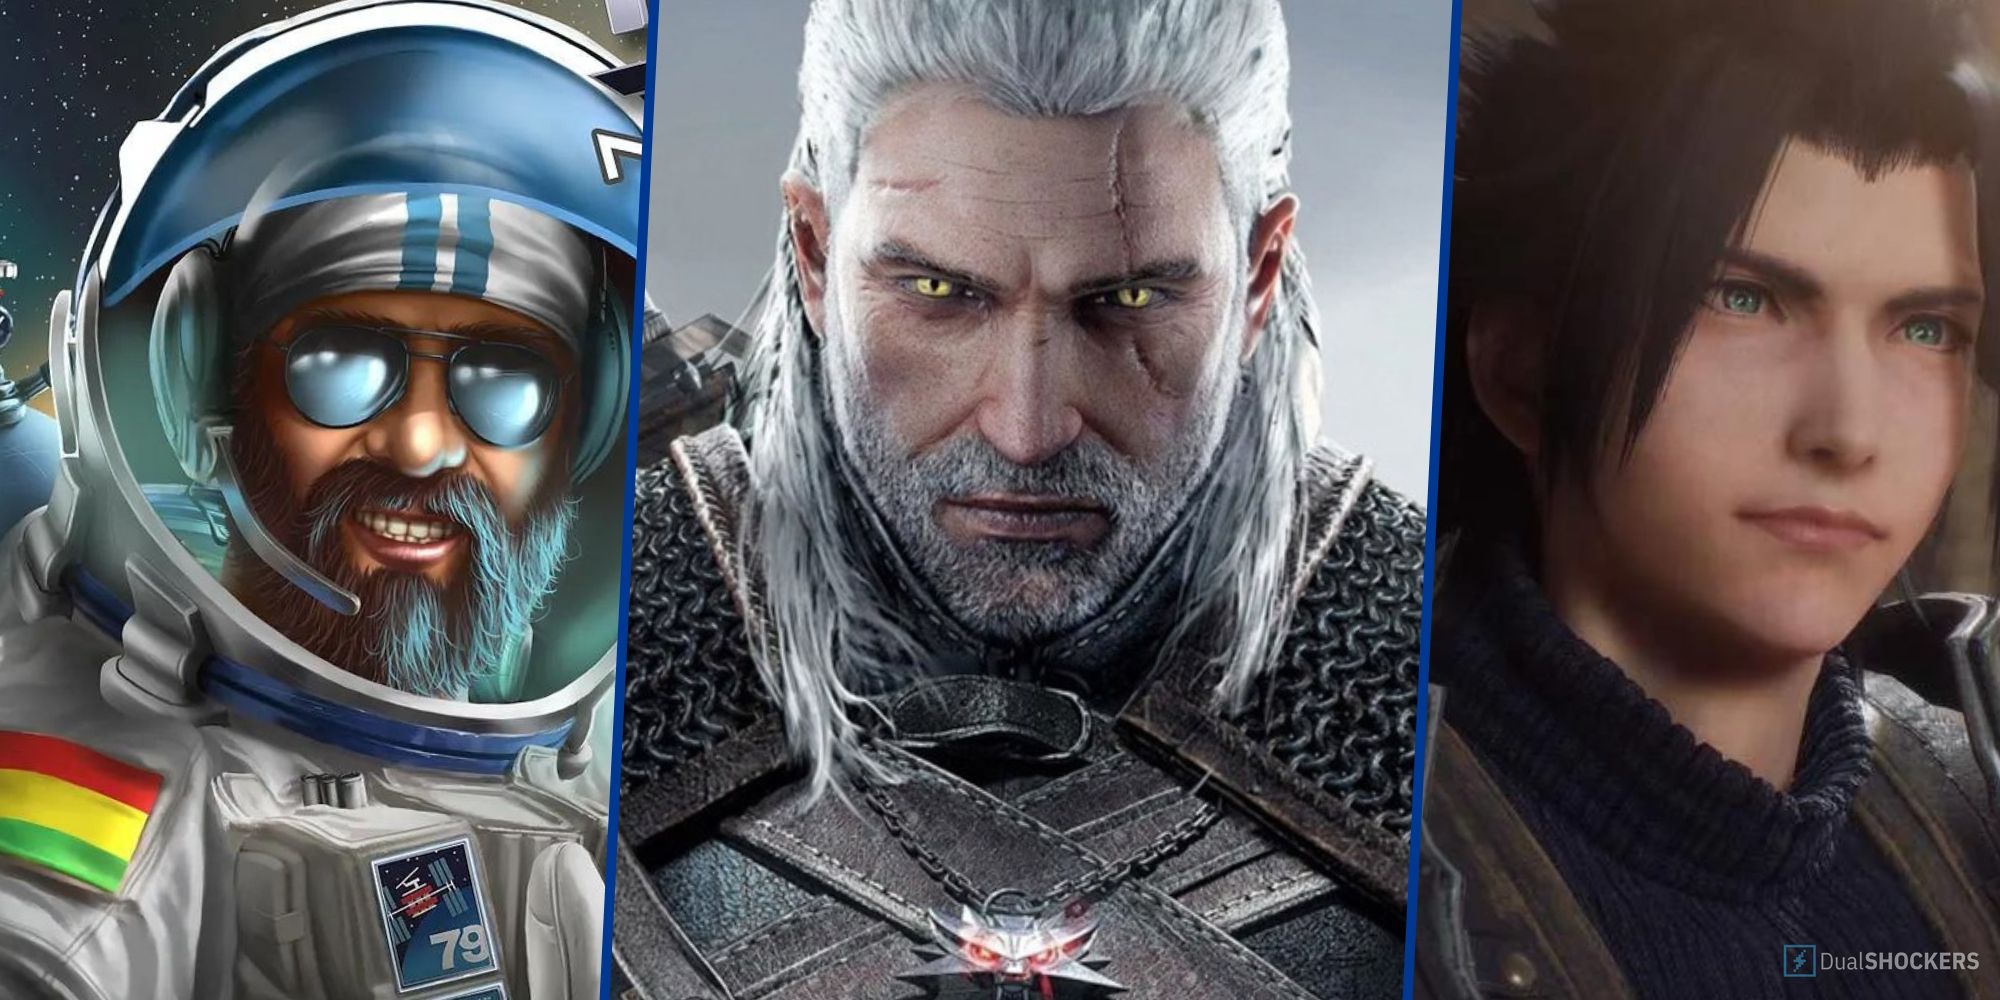 the witcher 3 and crisis core final fantasy vii reunion headline this week's new releases on playstation